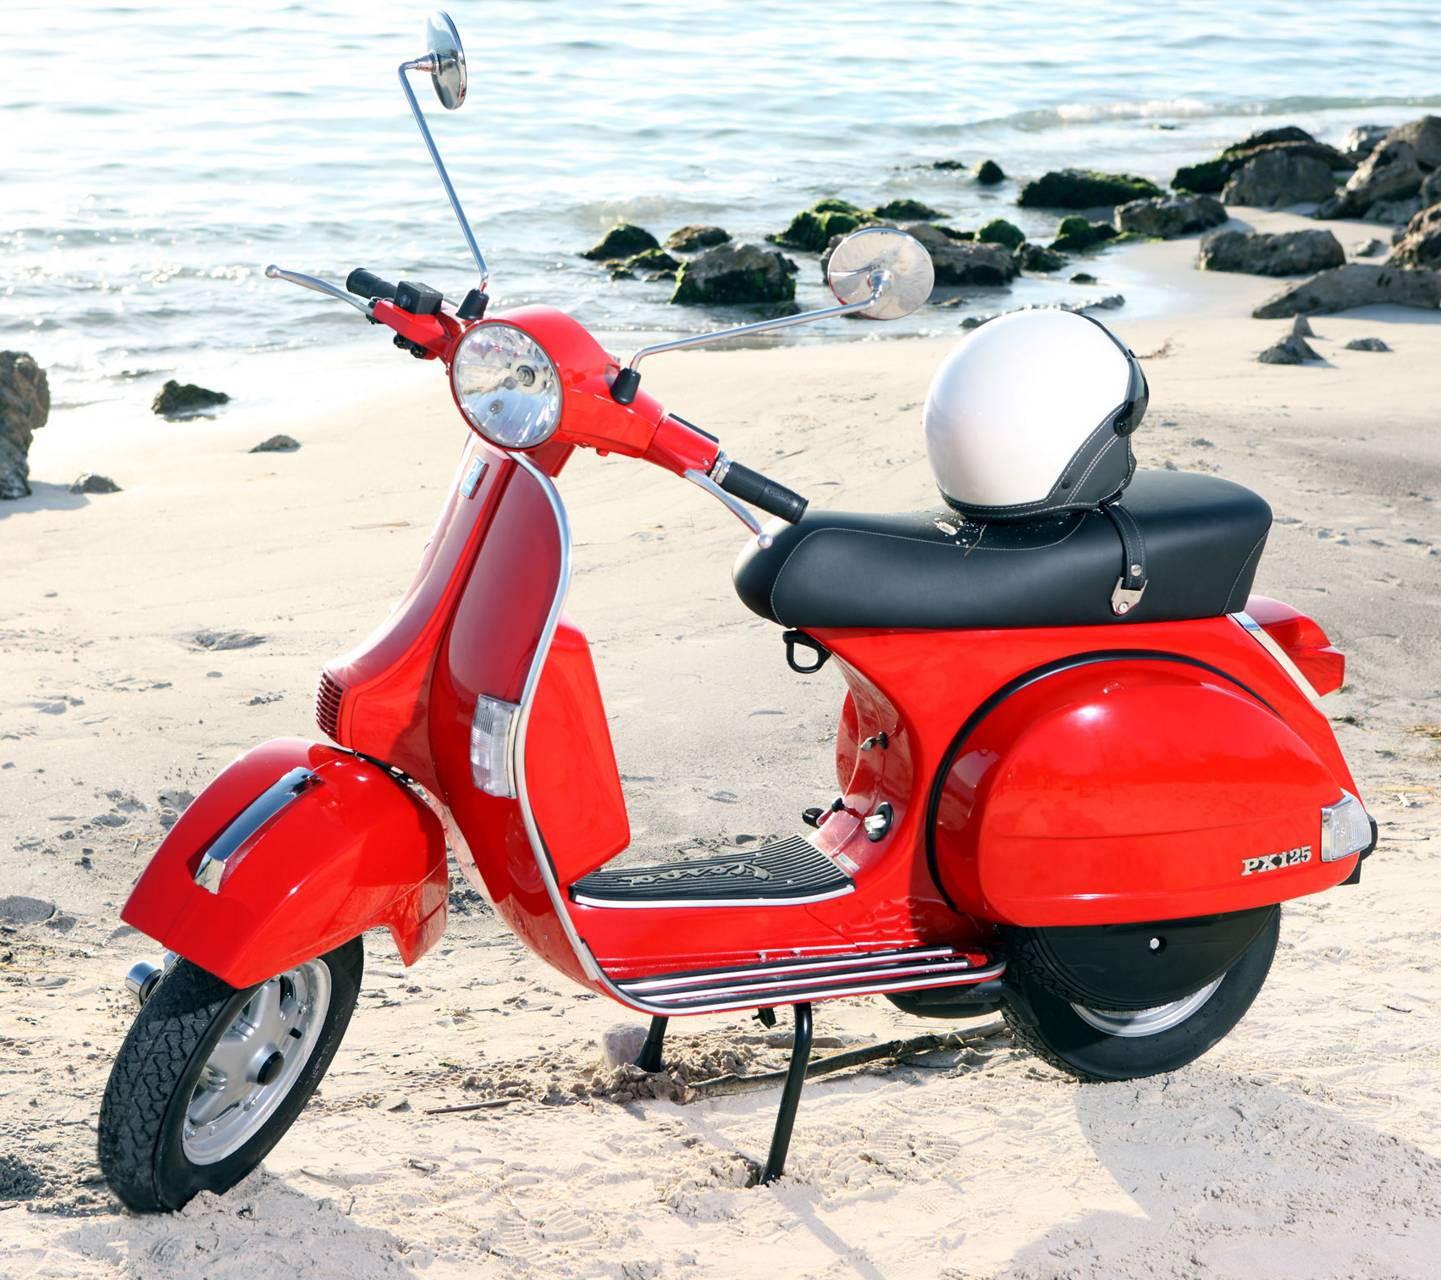 Download free vespa wallpaper for your mobile phone